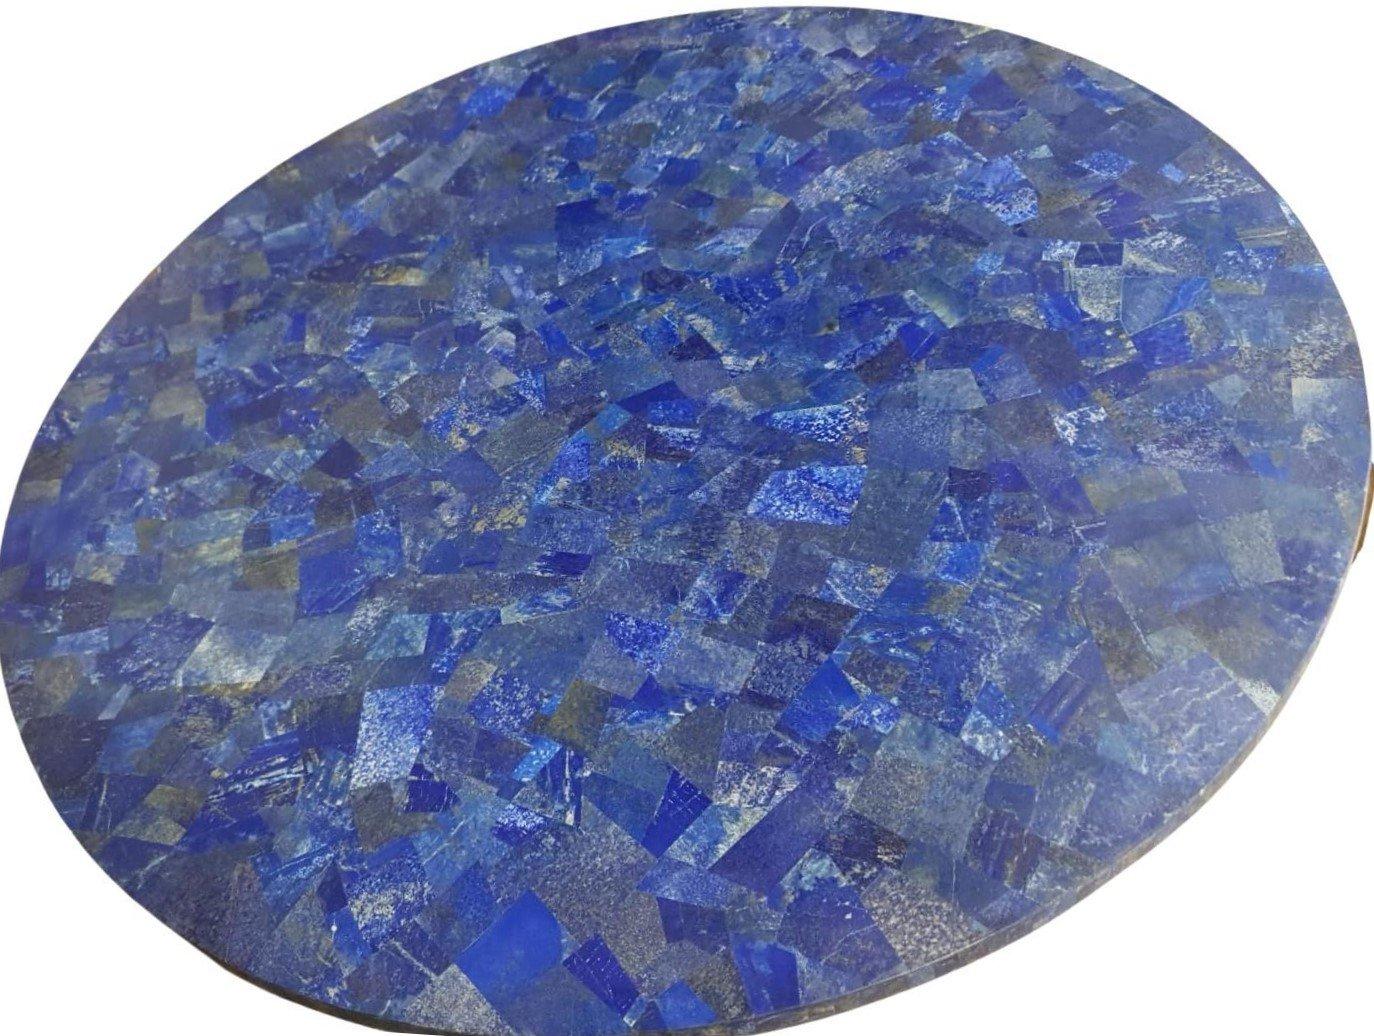 Large round top plated in Lapis lazuli stone. ADDITIONAL PHOTOS, INFORMATION OF THE LOT AND SHIPPING INFORMATION CAN BE REQUEST BY SENDING AN EMAIL. Tags: Piano tondo in lapislazzuli. Top redondo de lapislázuli. Plateau rond en lapis lazuli. Rundes